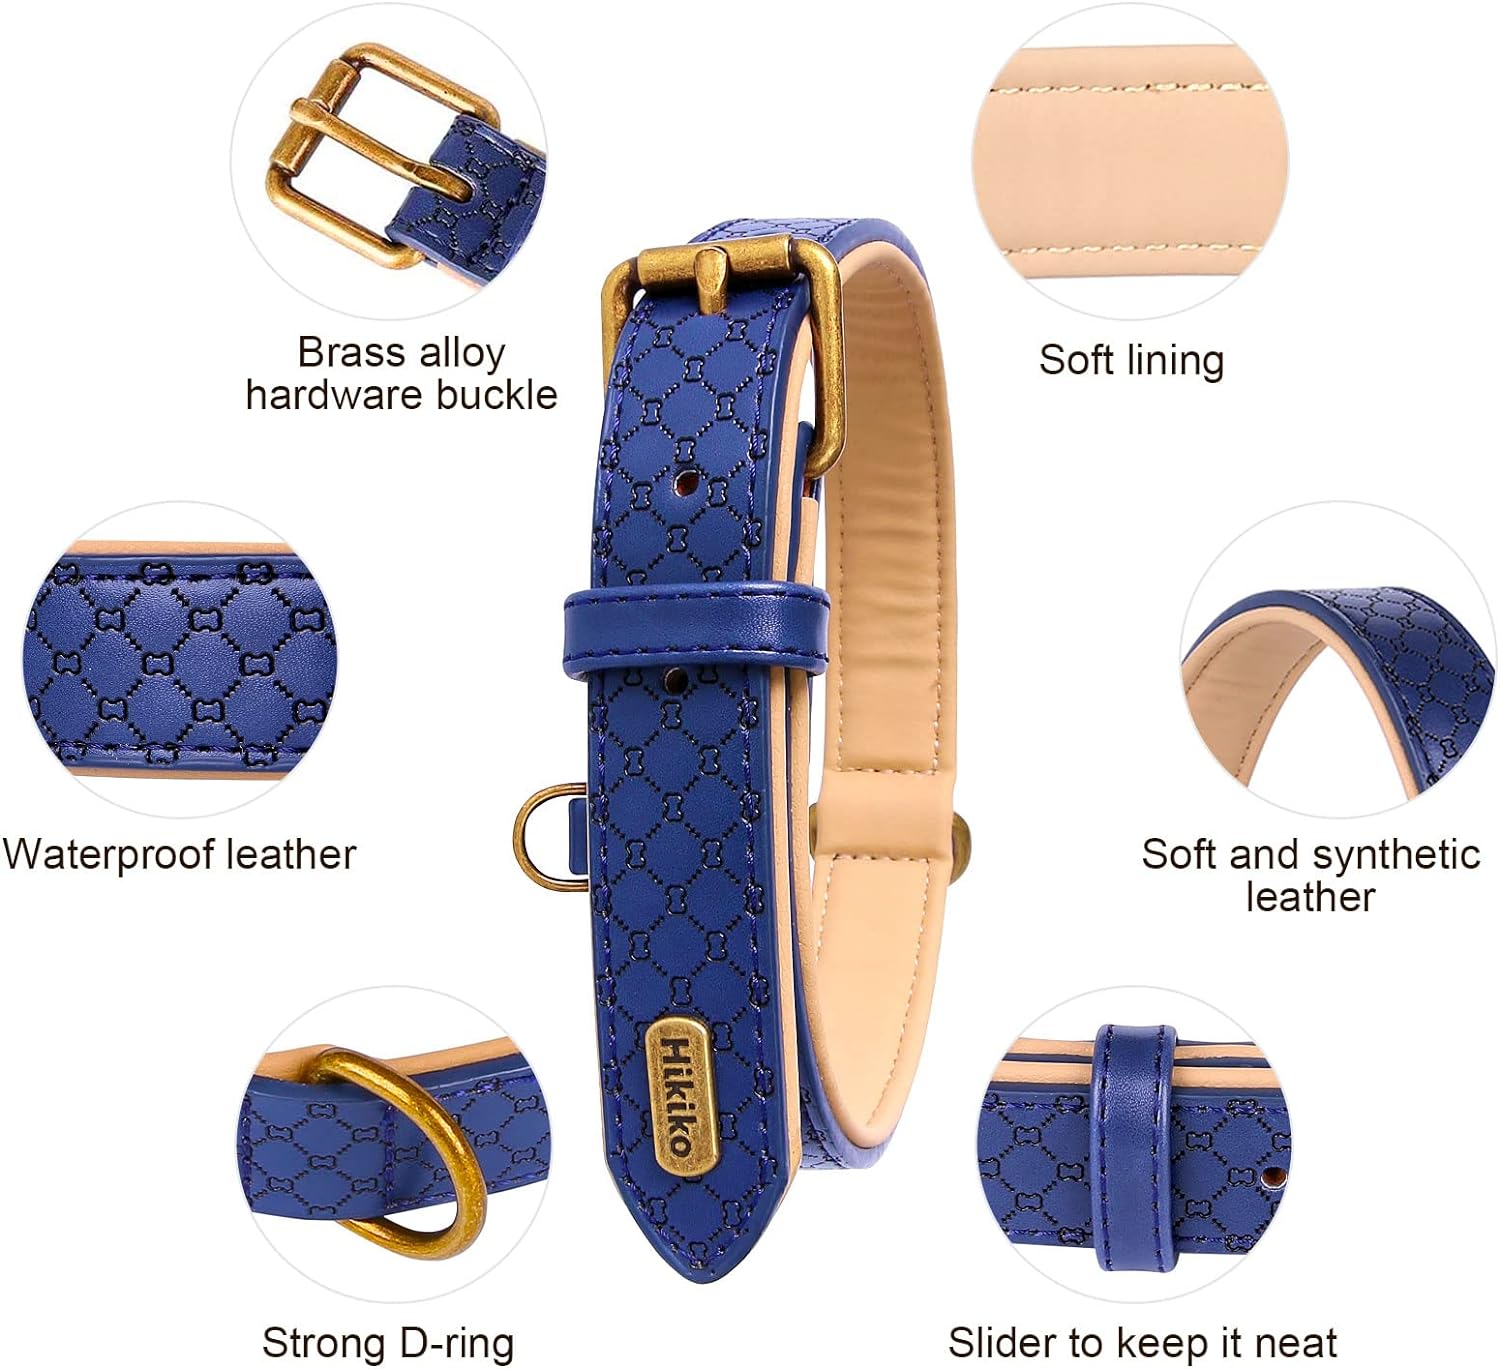 Basic Classic Luxury Padded Leather Dog Collar - Rust Proof Brass Strong Leather Collar Heavy Duty Alloy Hardware Best for Small, Medium, Large Dogs